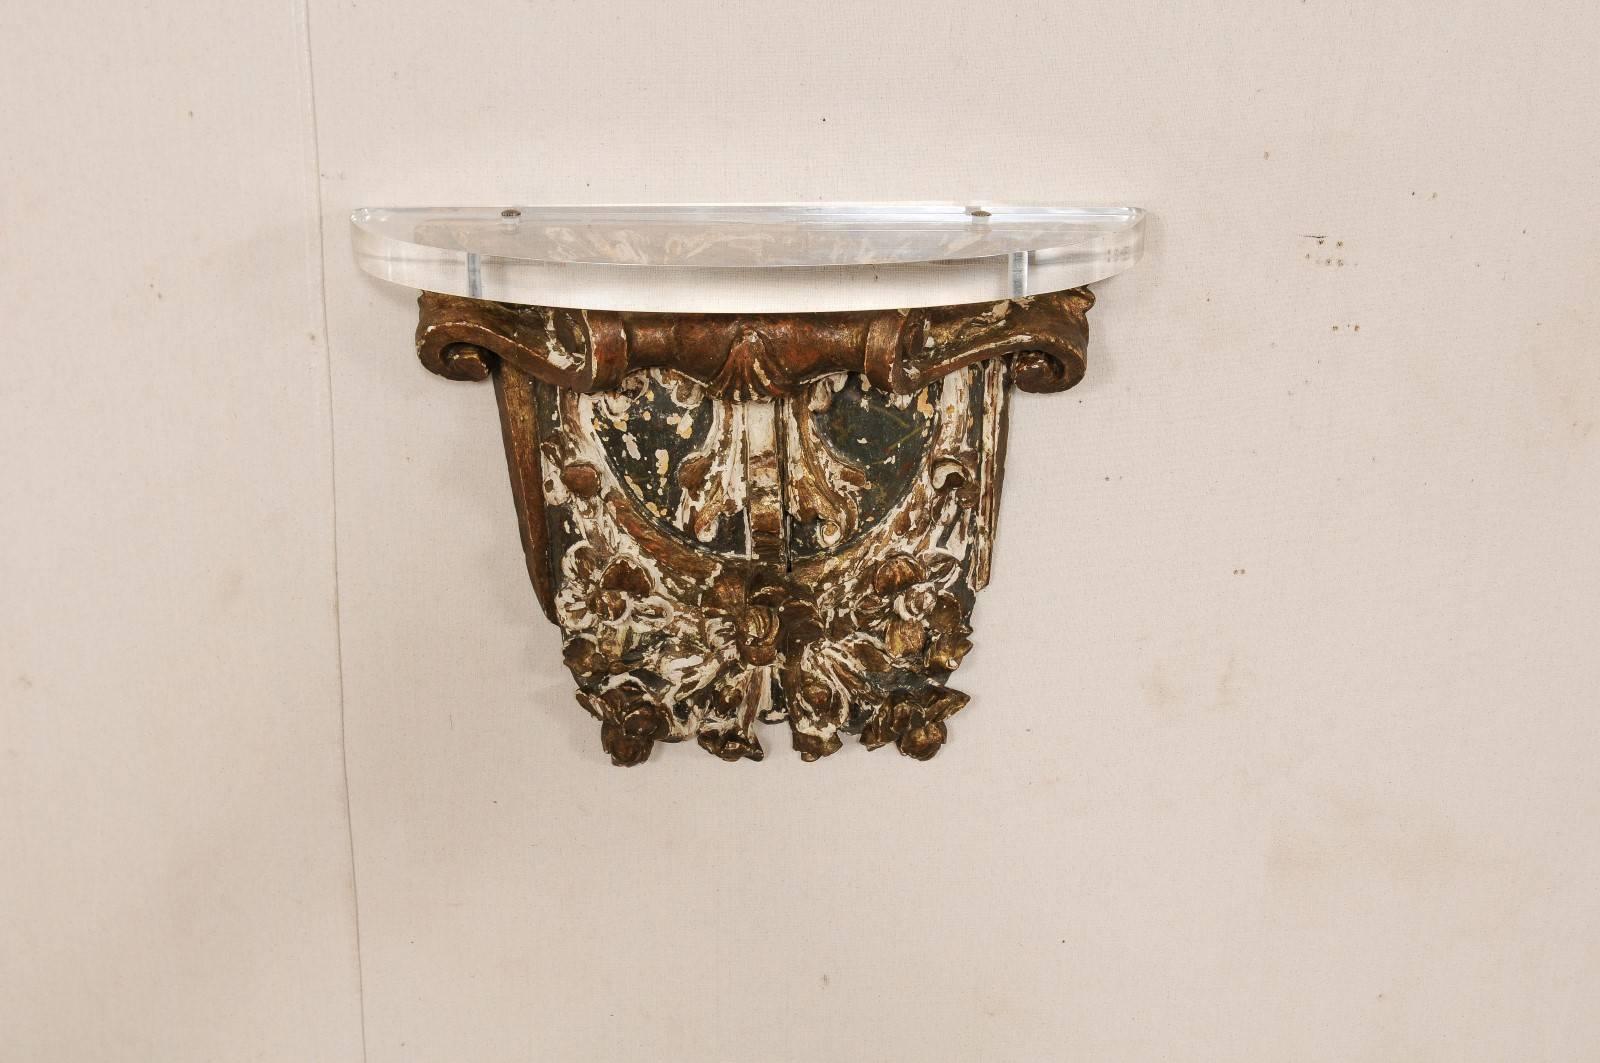 An early 19th century French architectural wood wall hanging fragment with Lucite shelf. This French architectural piece, from the early 19th century, has gilt over gesso and wood, and features hand-carved scroll and floral motif. The fragment has a